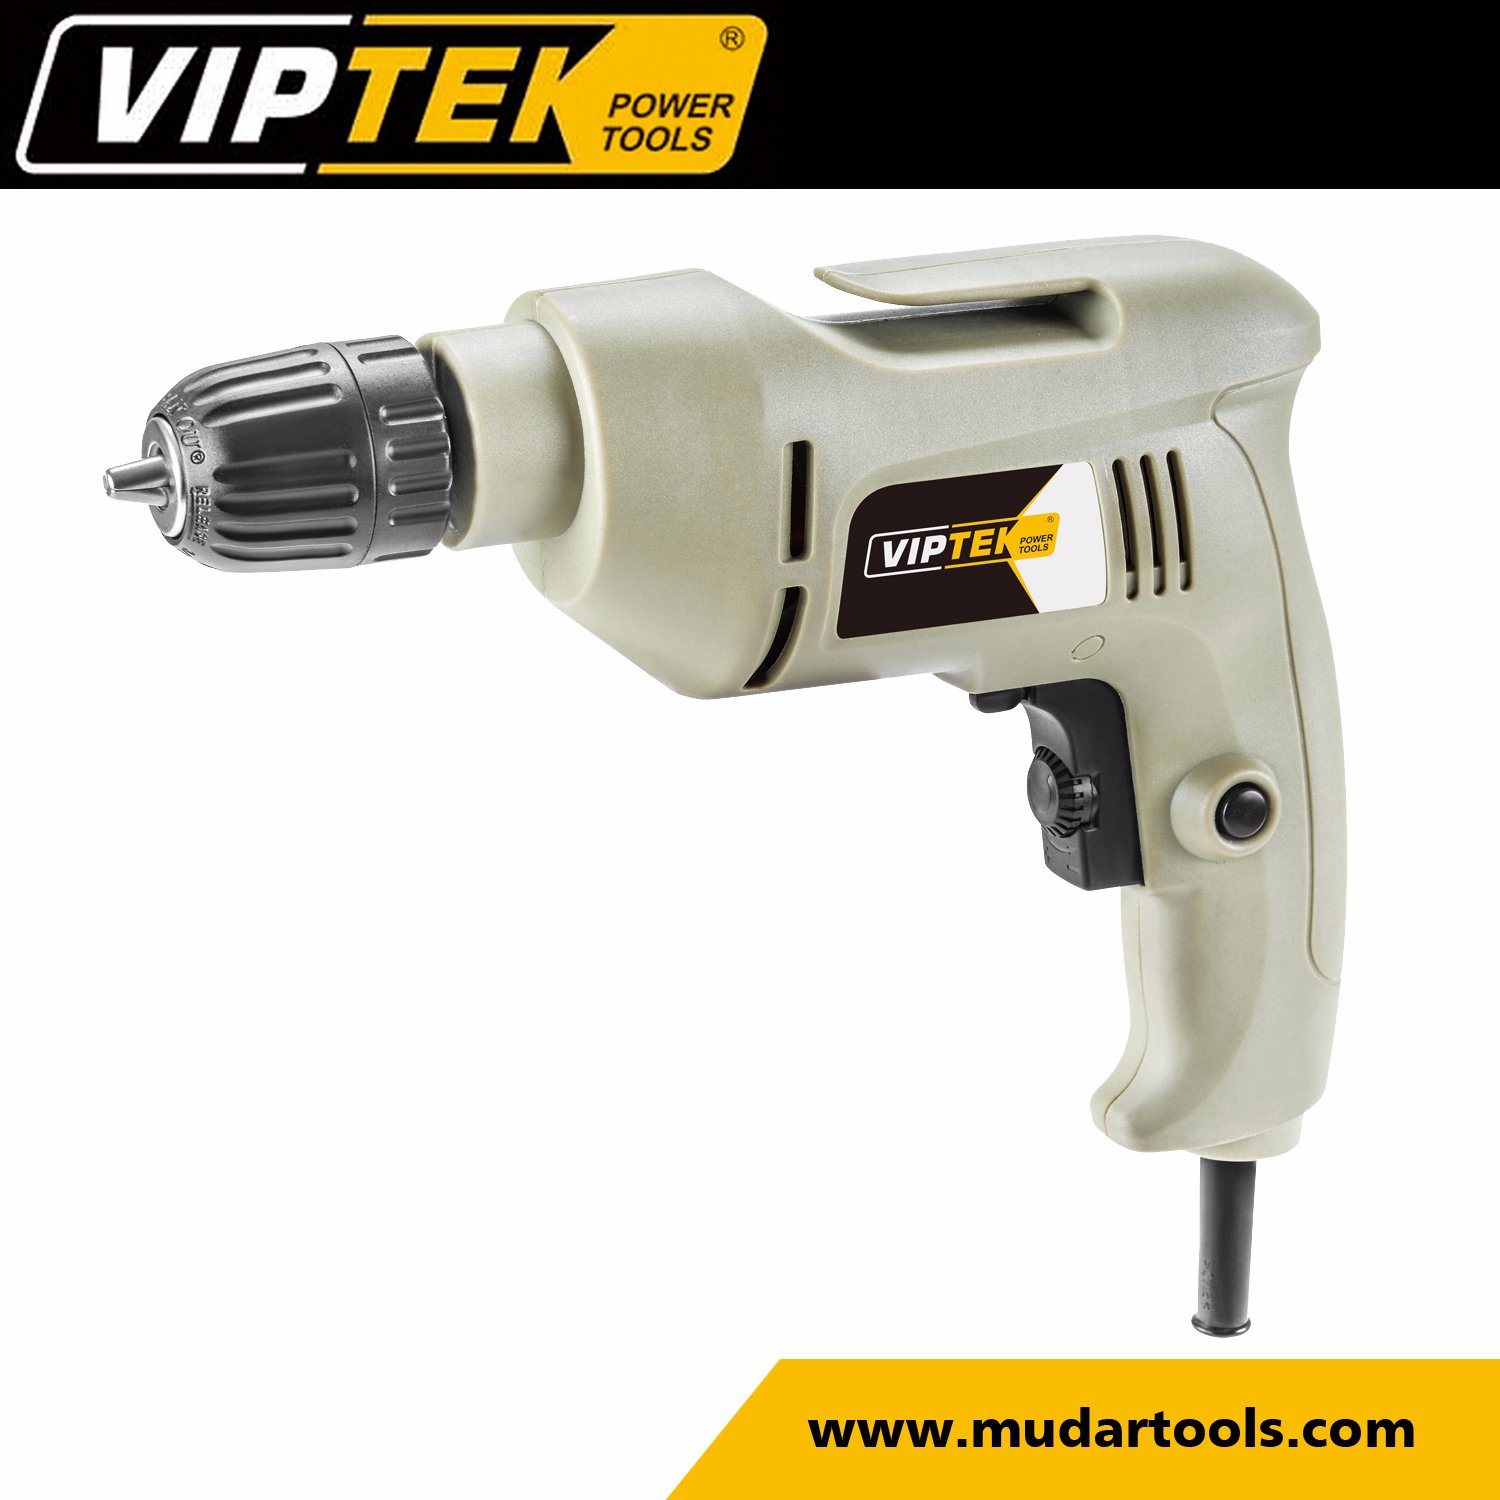 550W Professional Power Tool with 10mm Electric Drill